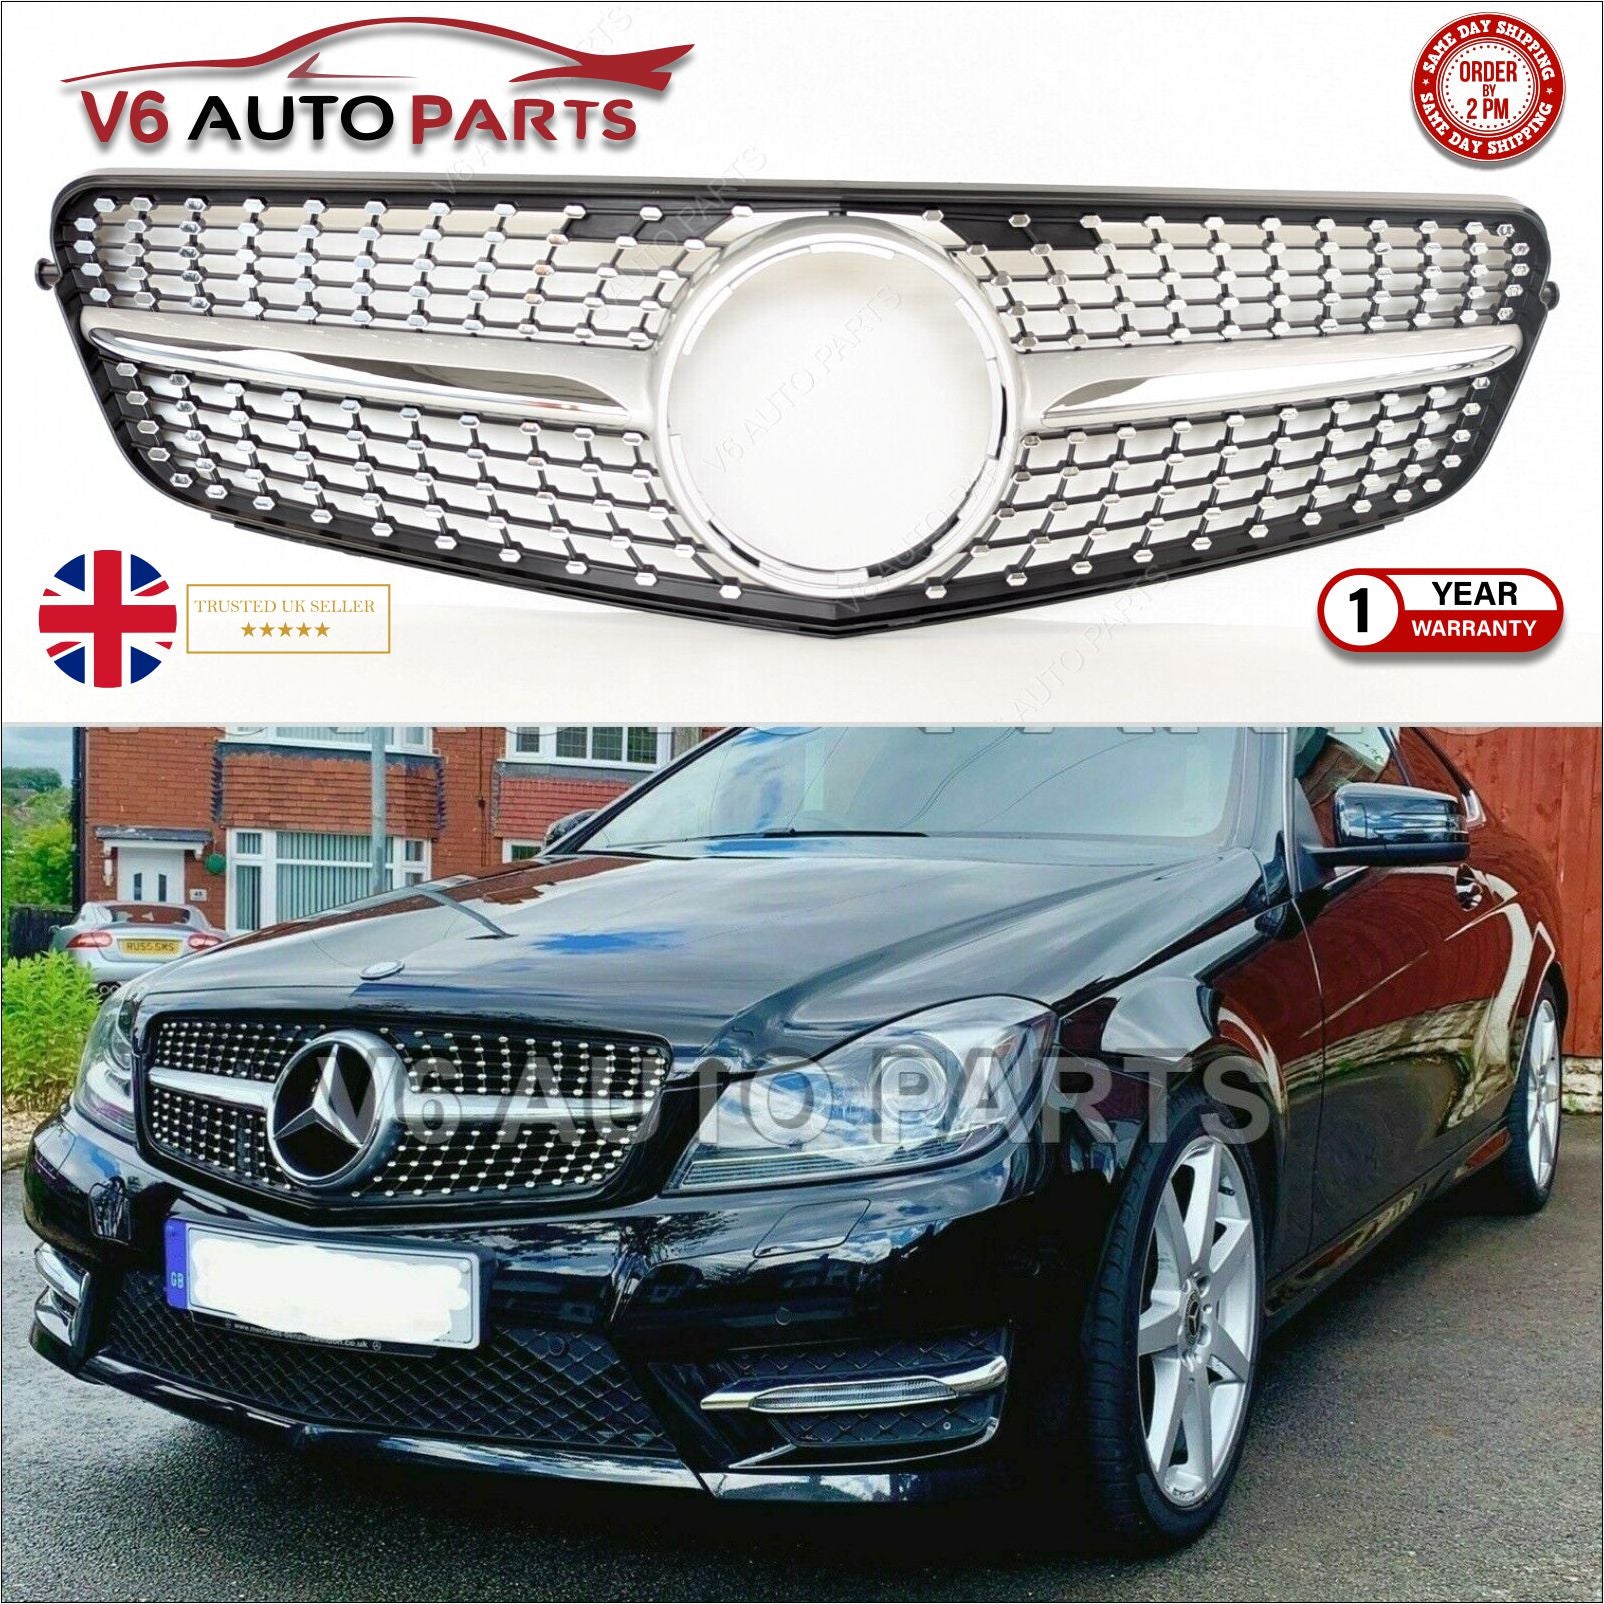 Mercedes C-Class W204 Grill Front Bumper Diamond Grille for 2007-14 C220 Saloon